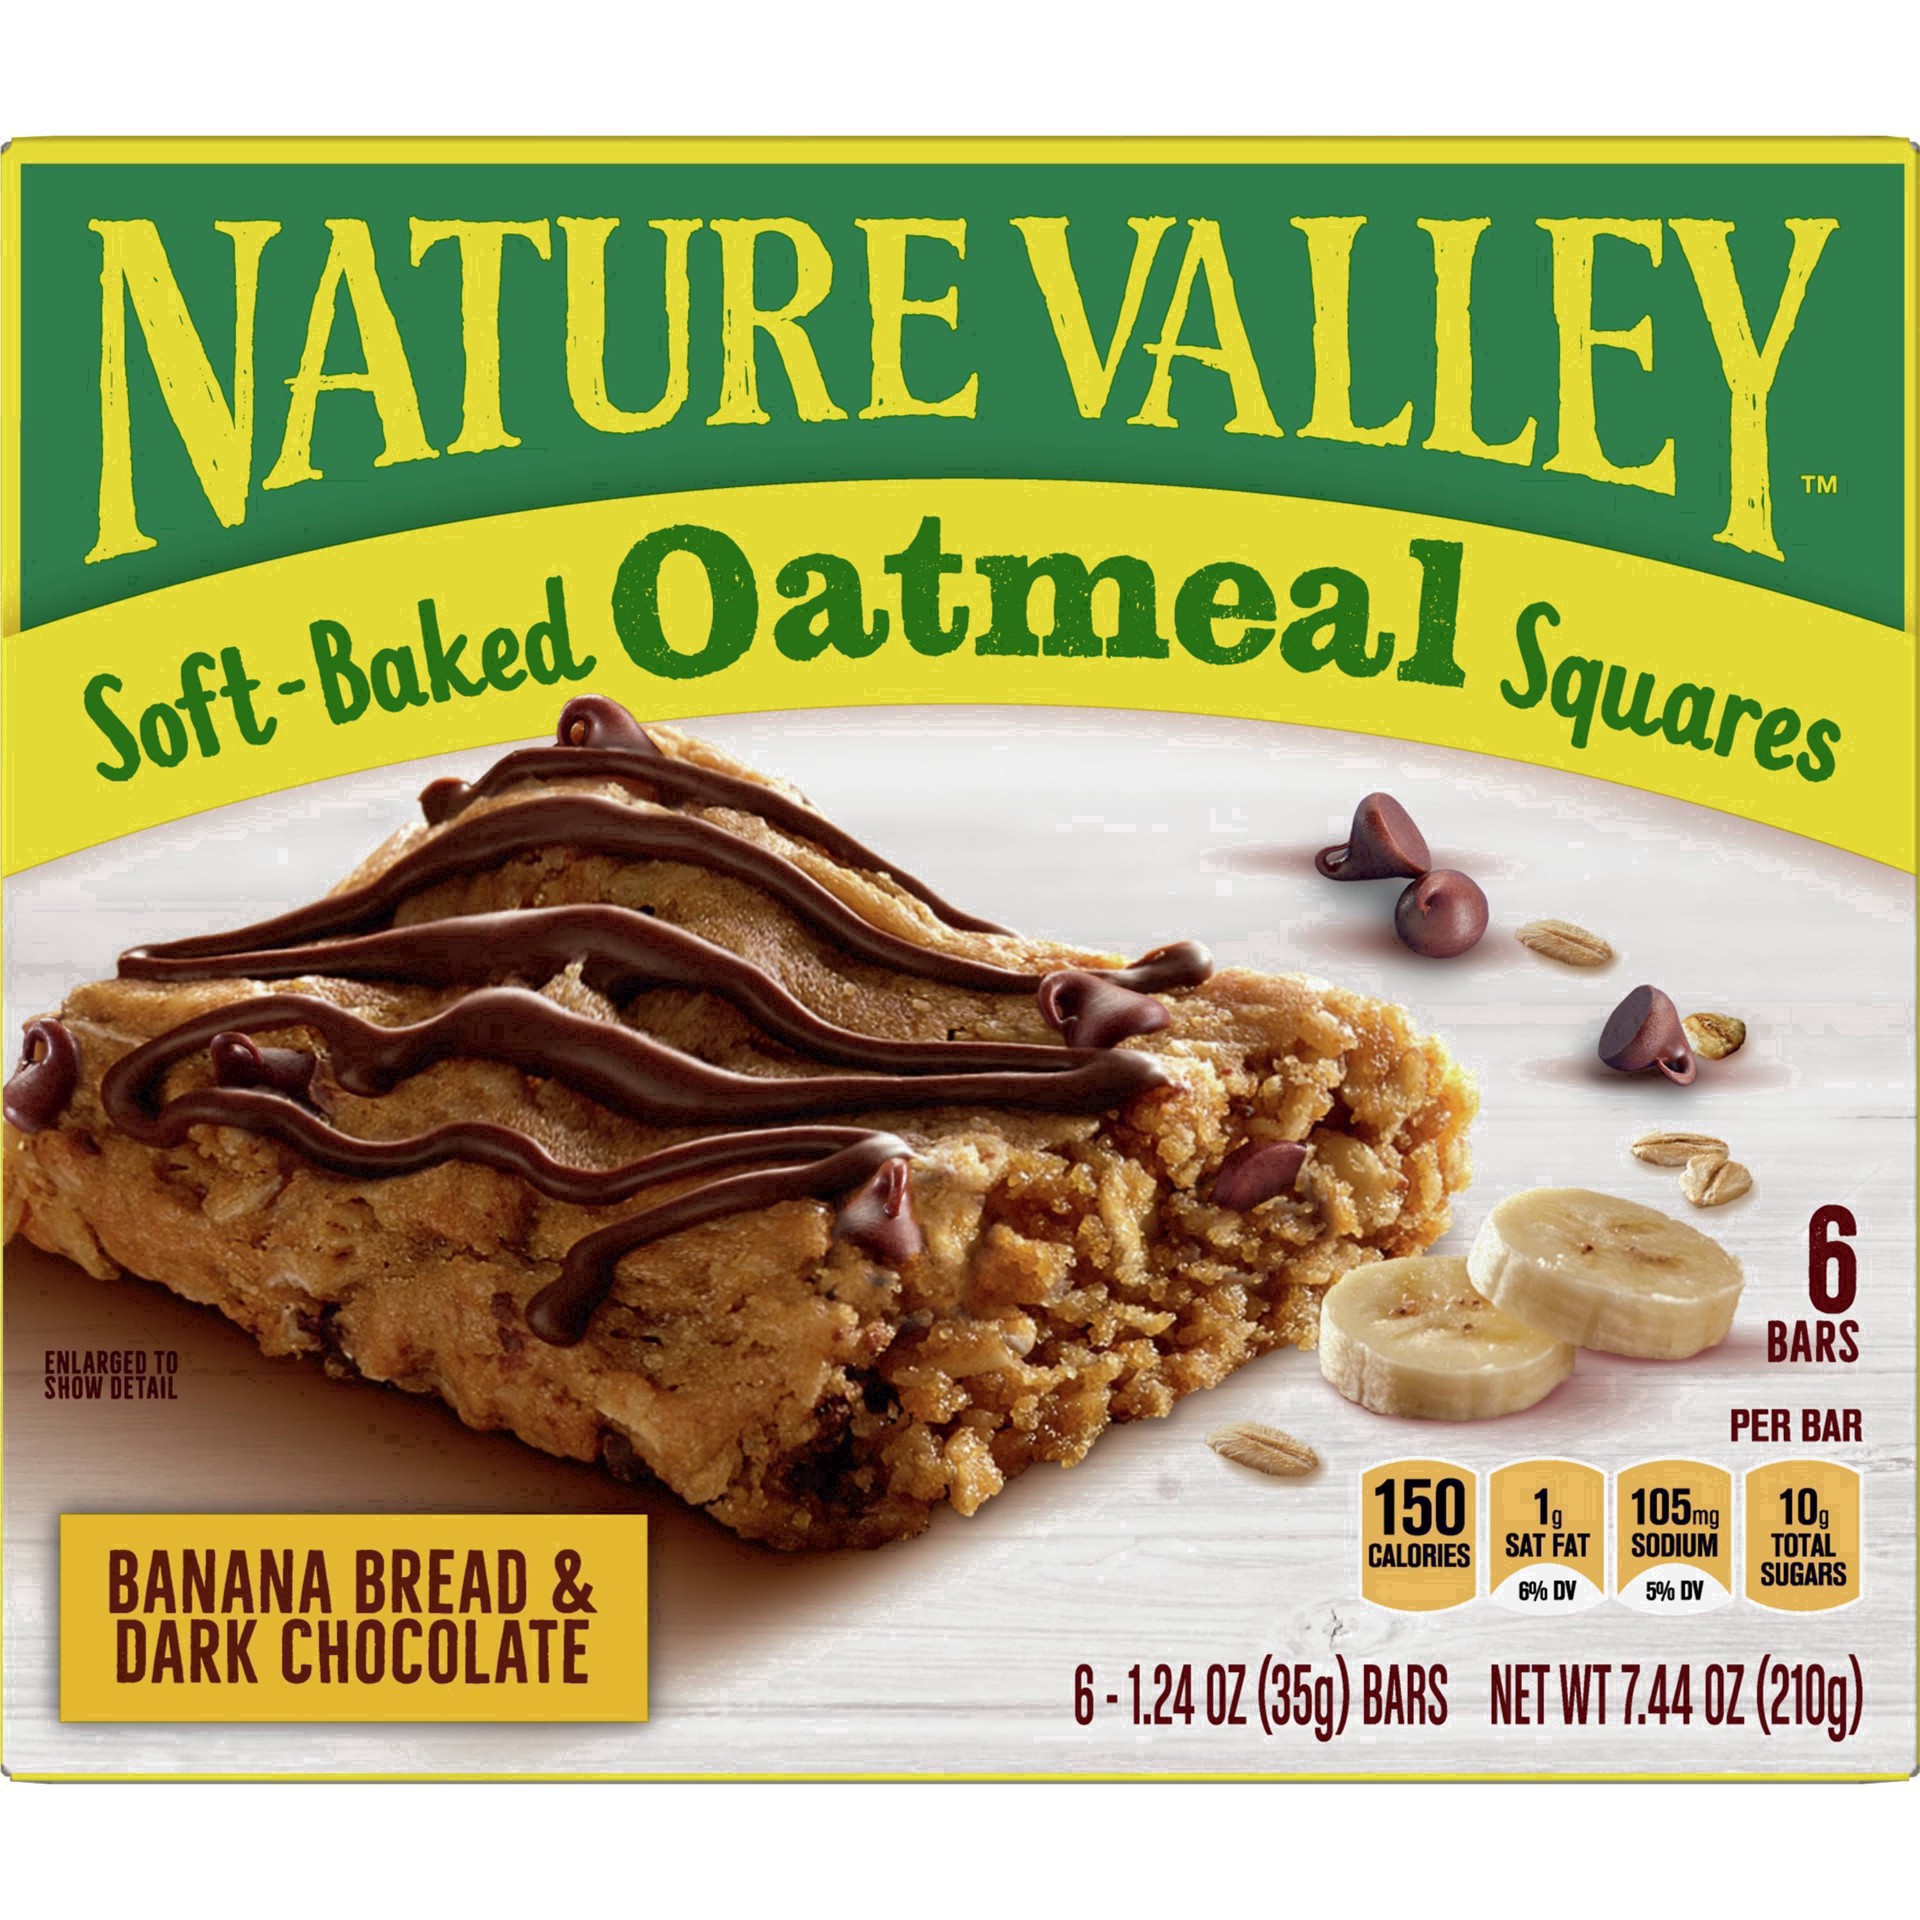 slide 14 of 101, Nature Valley Soft-Baked Oatmeal Squares, Banana Bread & Dark Chocolate, 6 ct, 6 ct